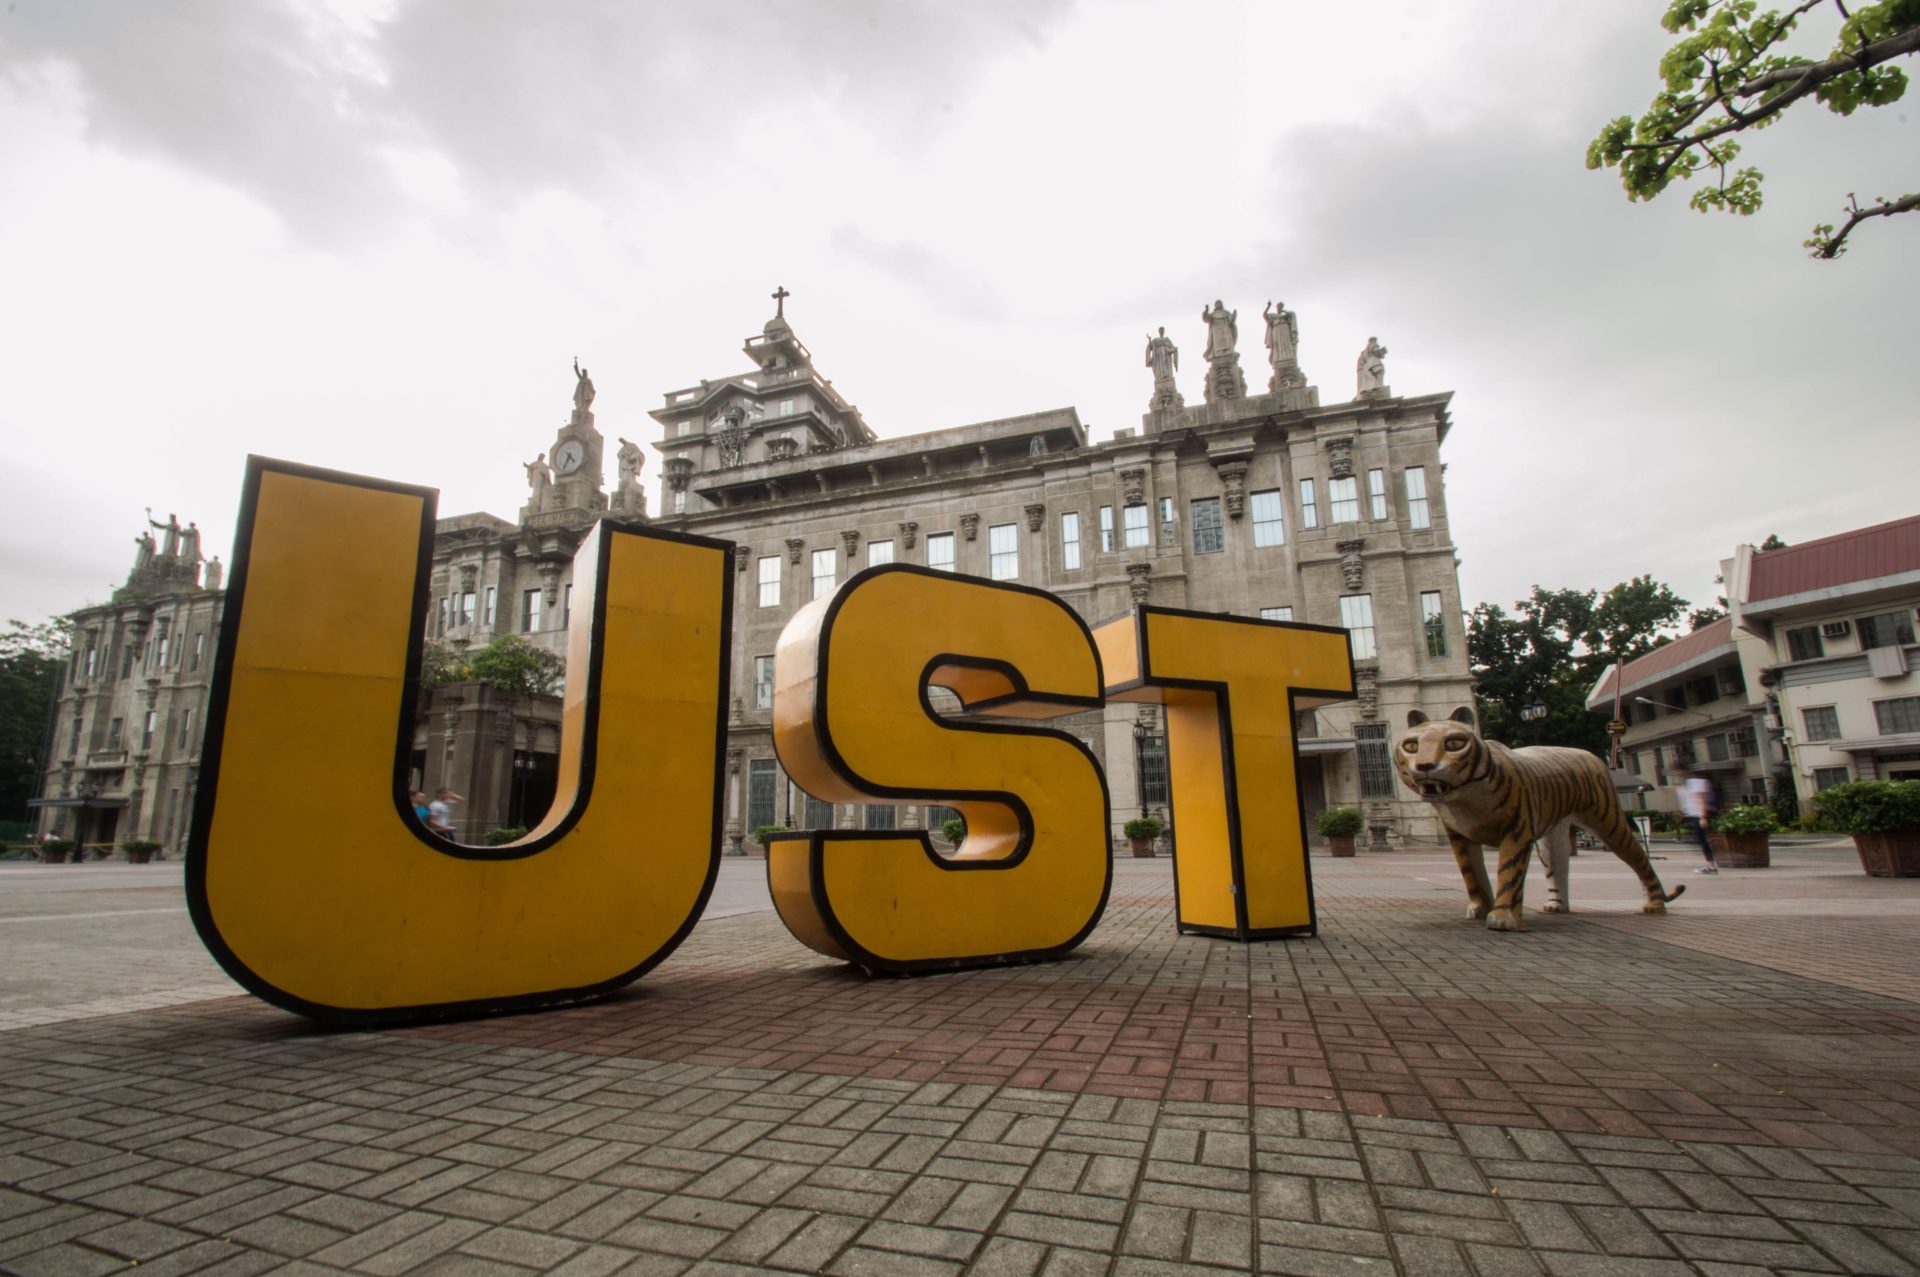 ust-classes-for-ay-2021-2022-to-begin-aug-9-the-varsitarian